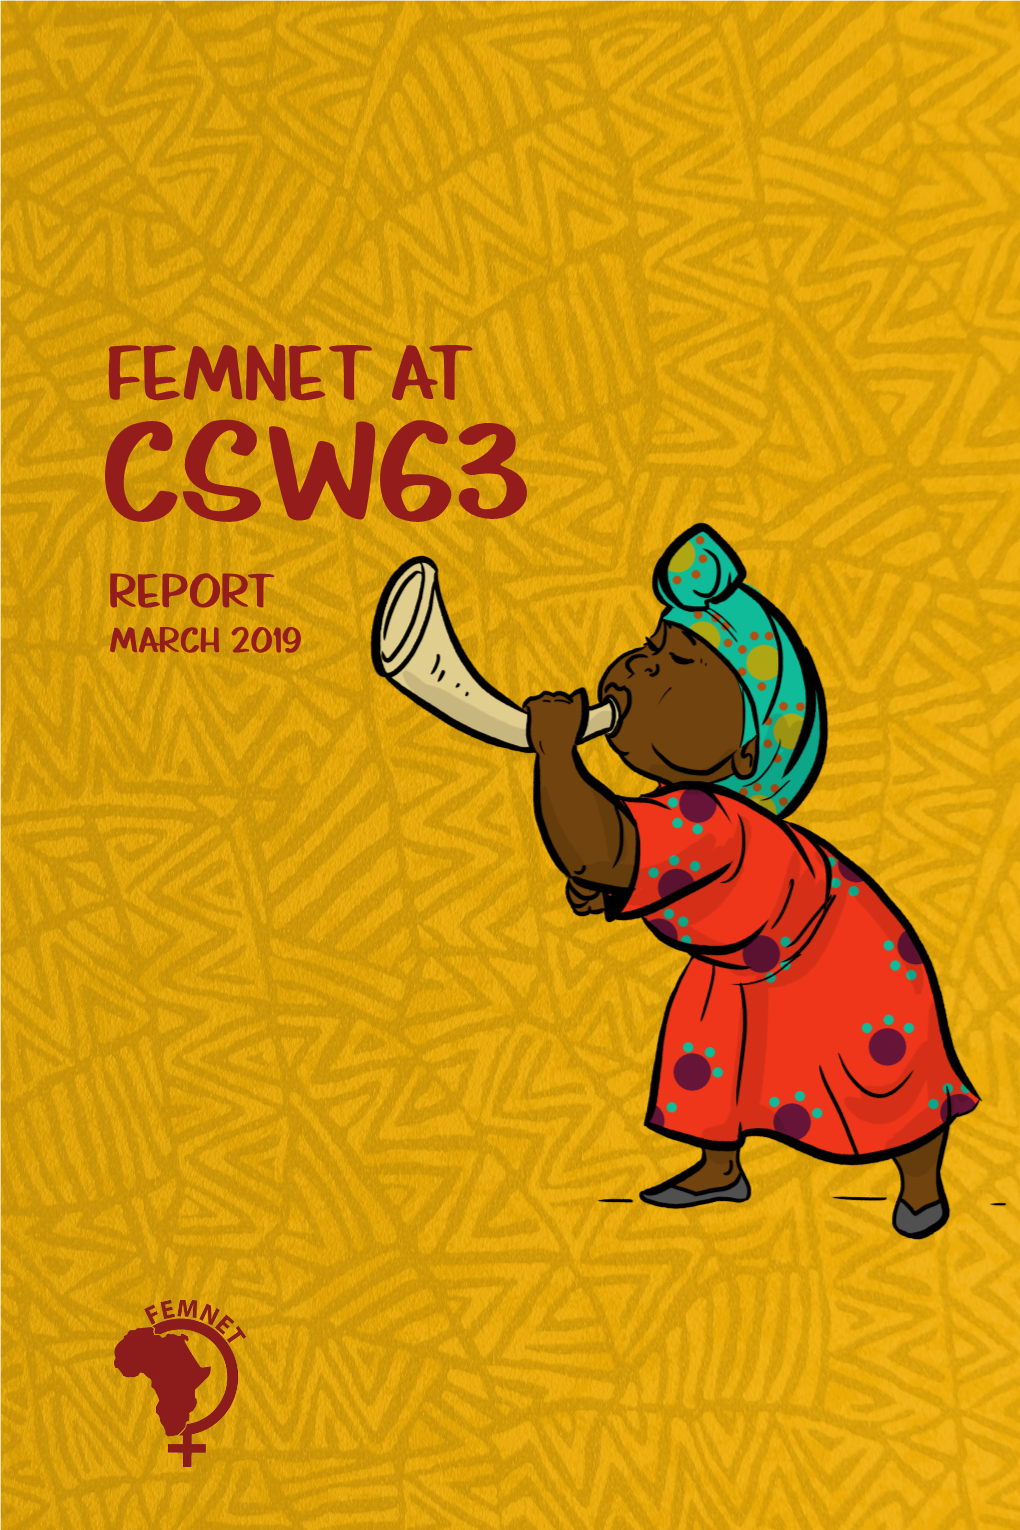 Read the FEMNET Report on CSW63 Engagement